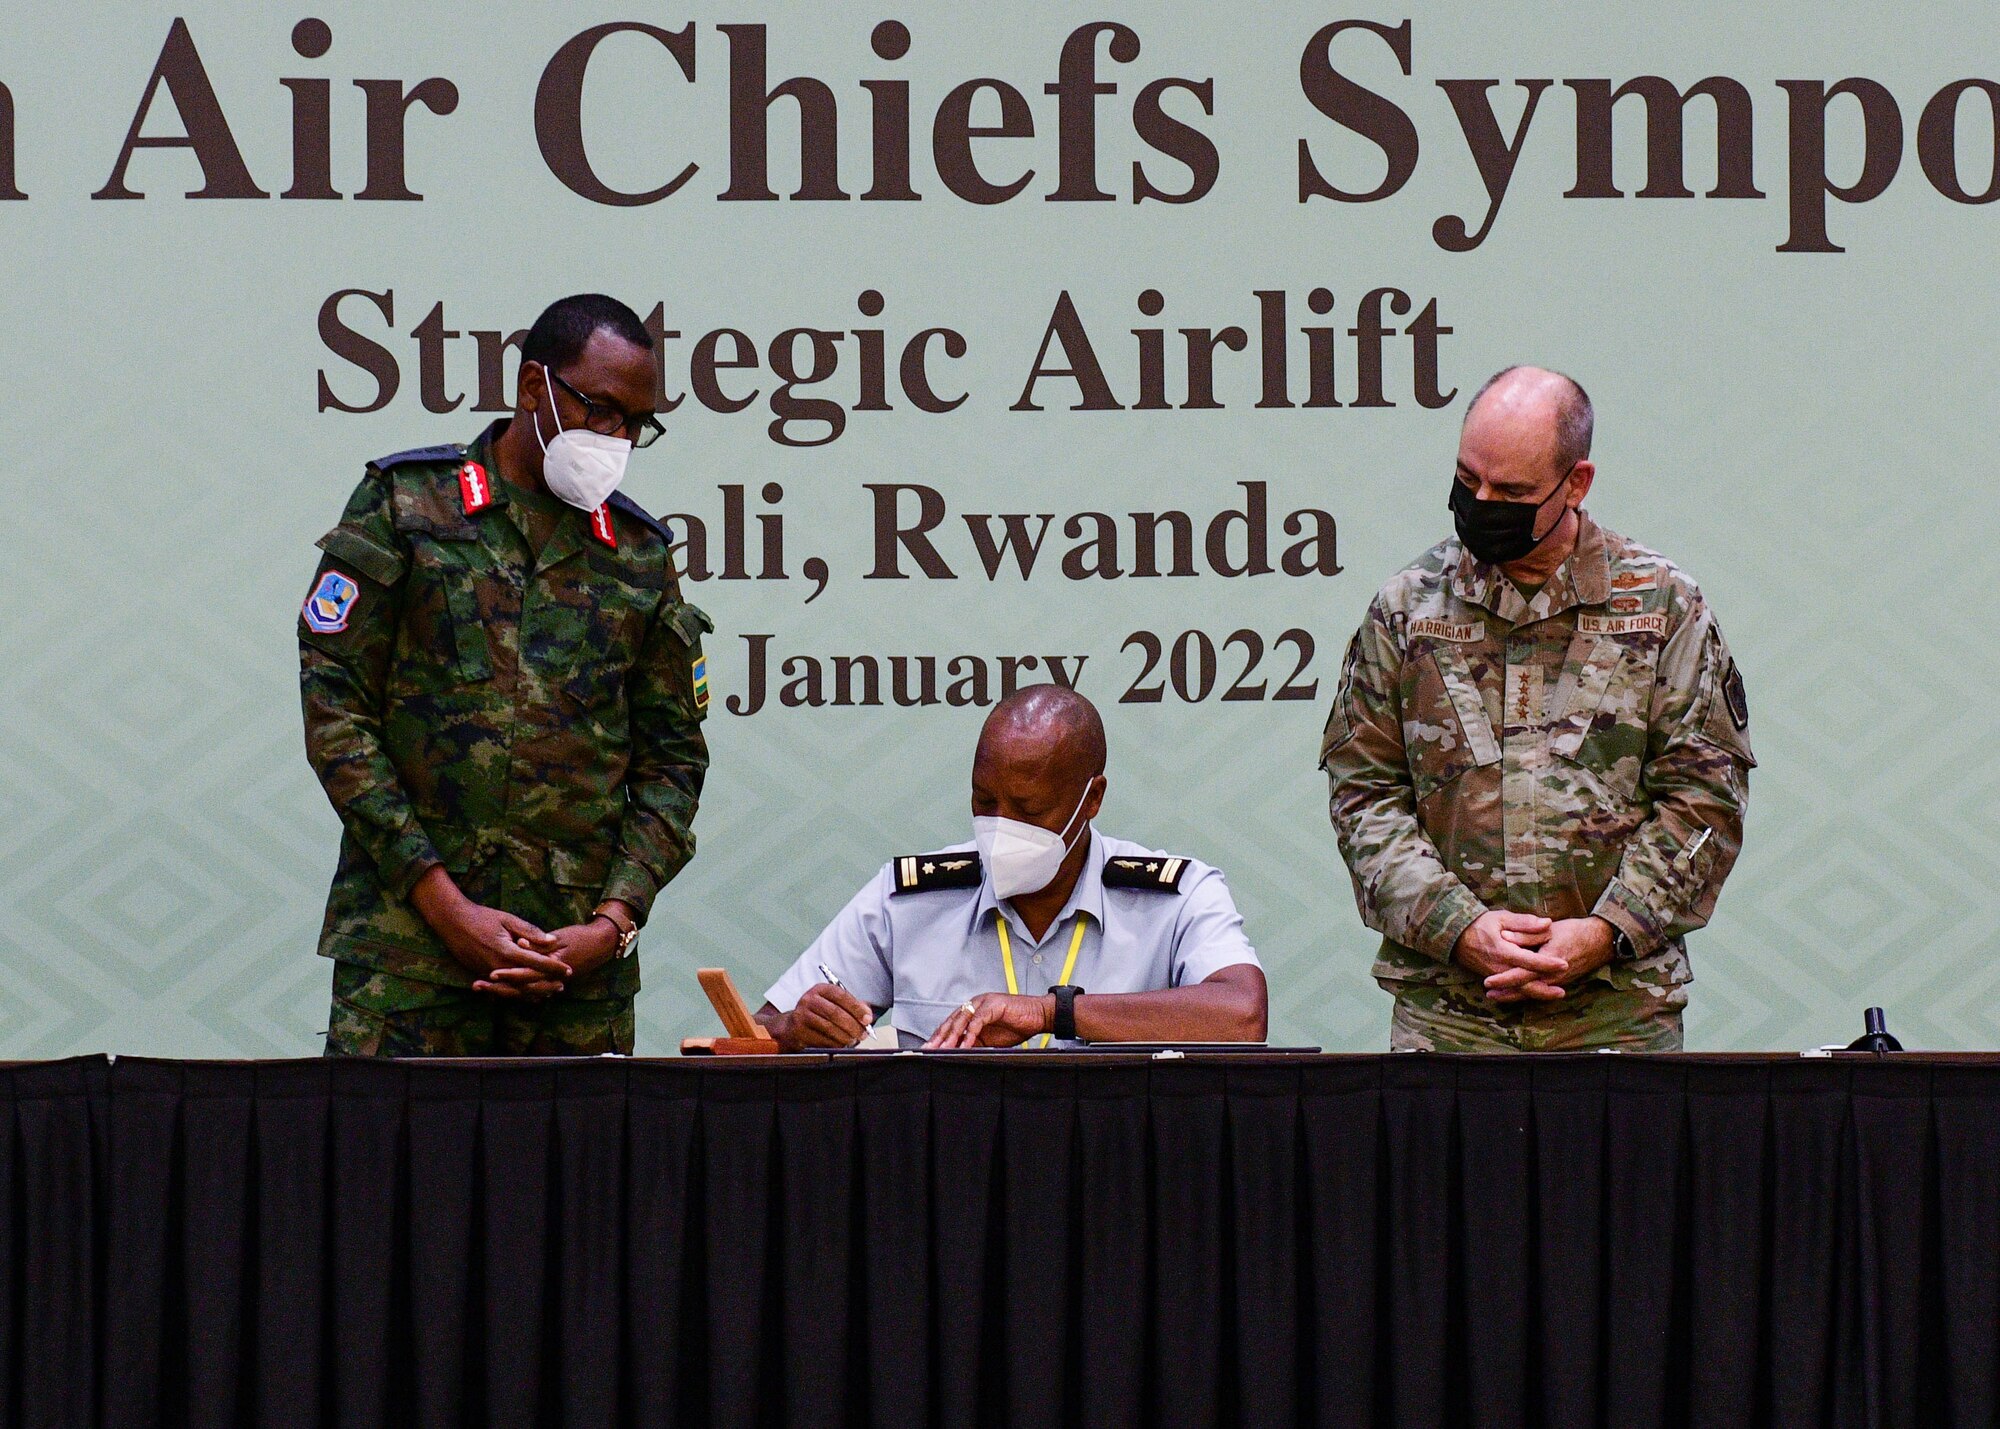 Burundi National Defence Force Brig. Gen. Hermalas Ndabashinze, Burundi Air Force Chief, middle, signs a charter to join the Association of African Air Forces while Rwandan Air Force Lt. Gen. Jean Jacques Mupenzi, Rwandan Air Chief of Staff, left, and U.S. Air Force Gen. Jeffrey Harrigian, U.S. Air Forces in Europe and Air Forces Africa commander, observe at the 2022 African Air Chiefs Symposium in Kigali, Rwanda, Jan. 26, 2022. During the 2014 AACS, there was widespread recognition of the need to formalize the AAAF in order to maximize the utility of the forum. The AAAF was established to foster and strengthen cooperation and mutual support among its members. (U.S. Air Force photo by Senior Airman Brooke Moeder)